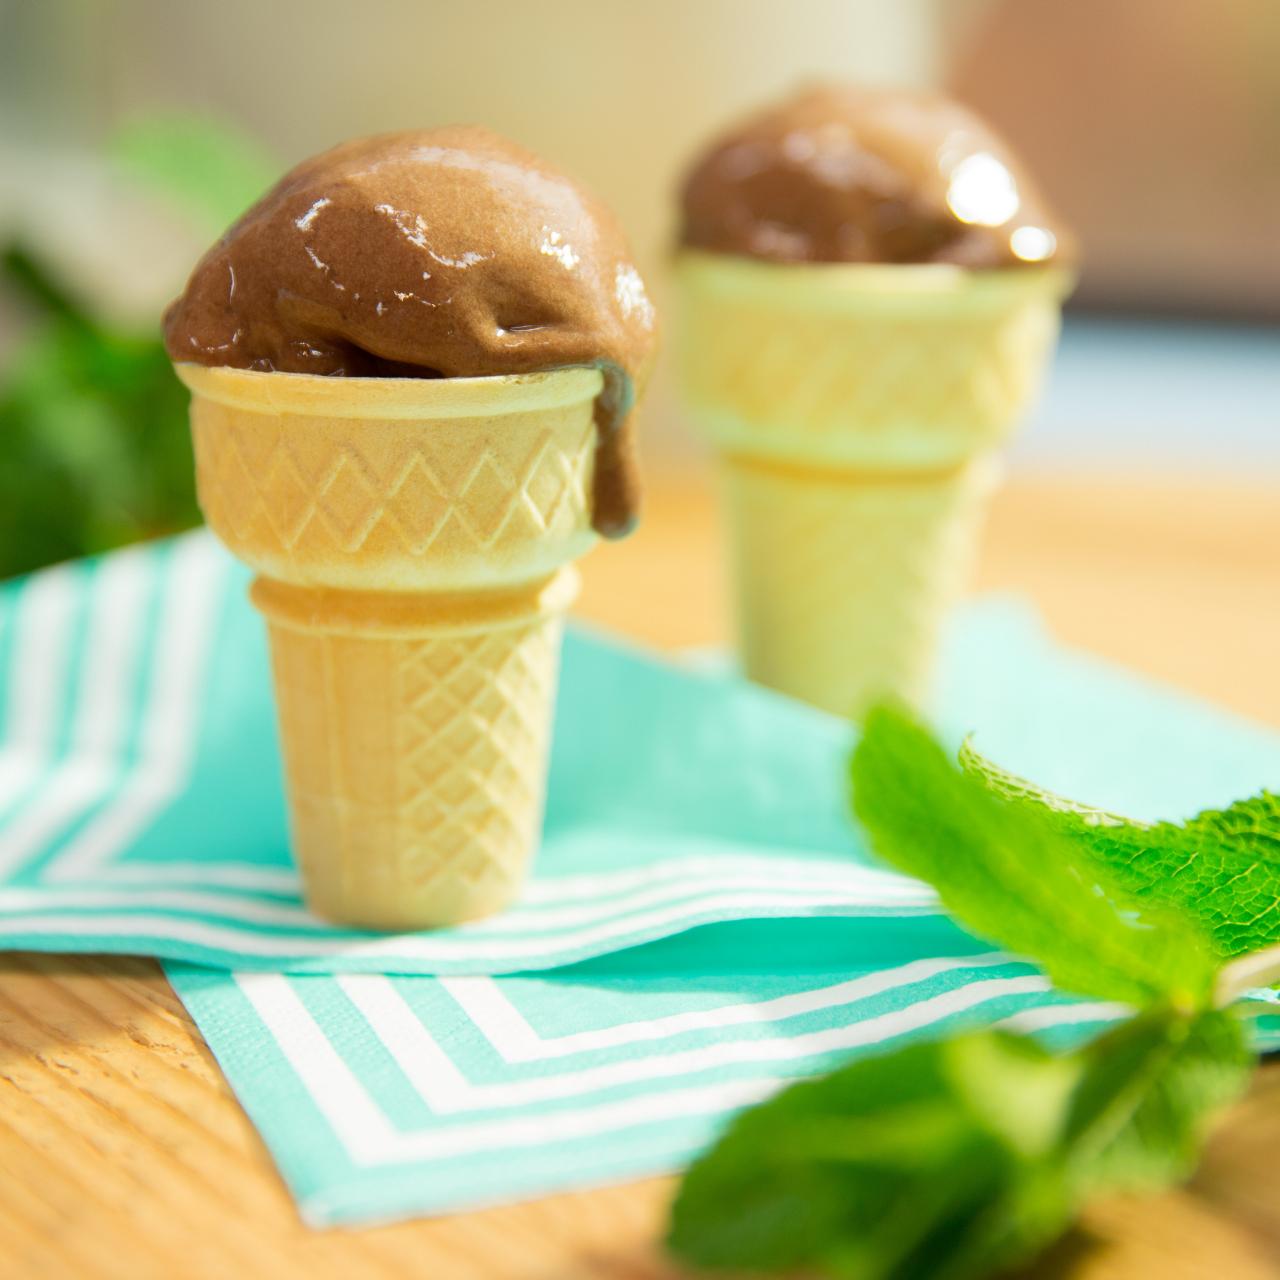 Why Do Mint & Chocolate Taste So Good Together? - Blog